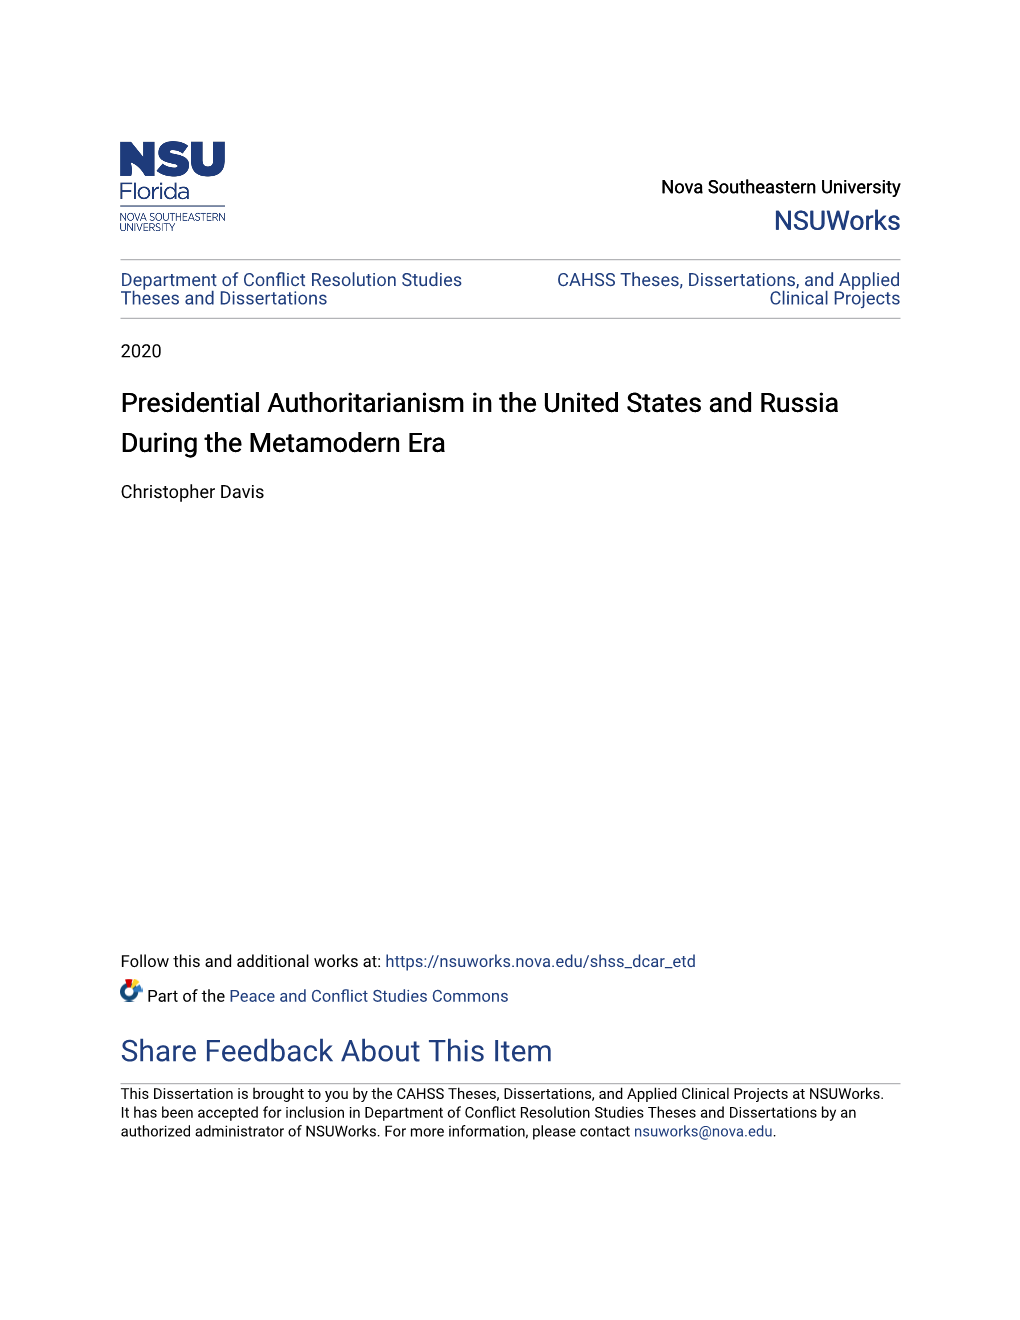 Presidential Authoritarianism in the United States and Russia During the Metamodern Era